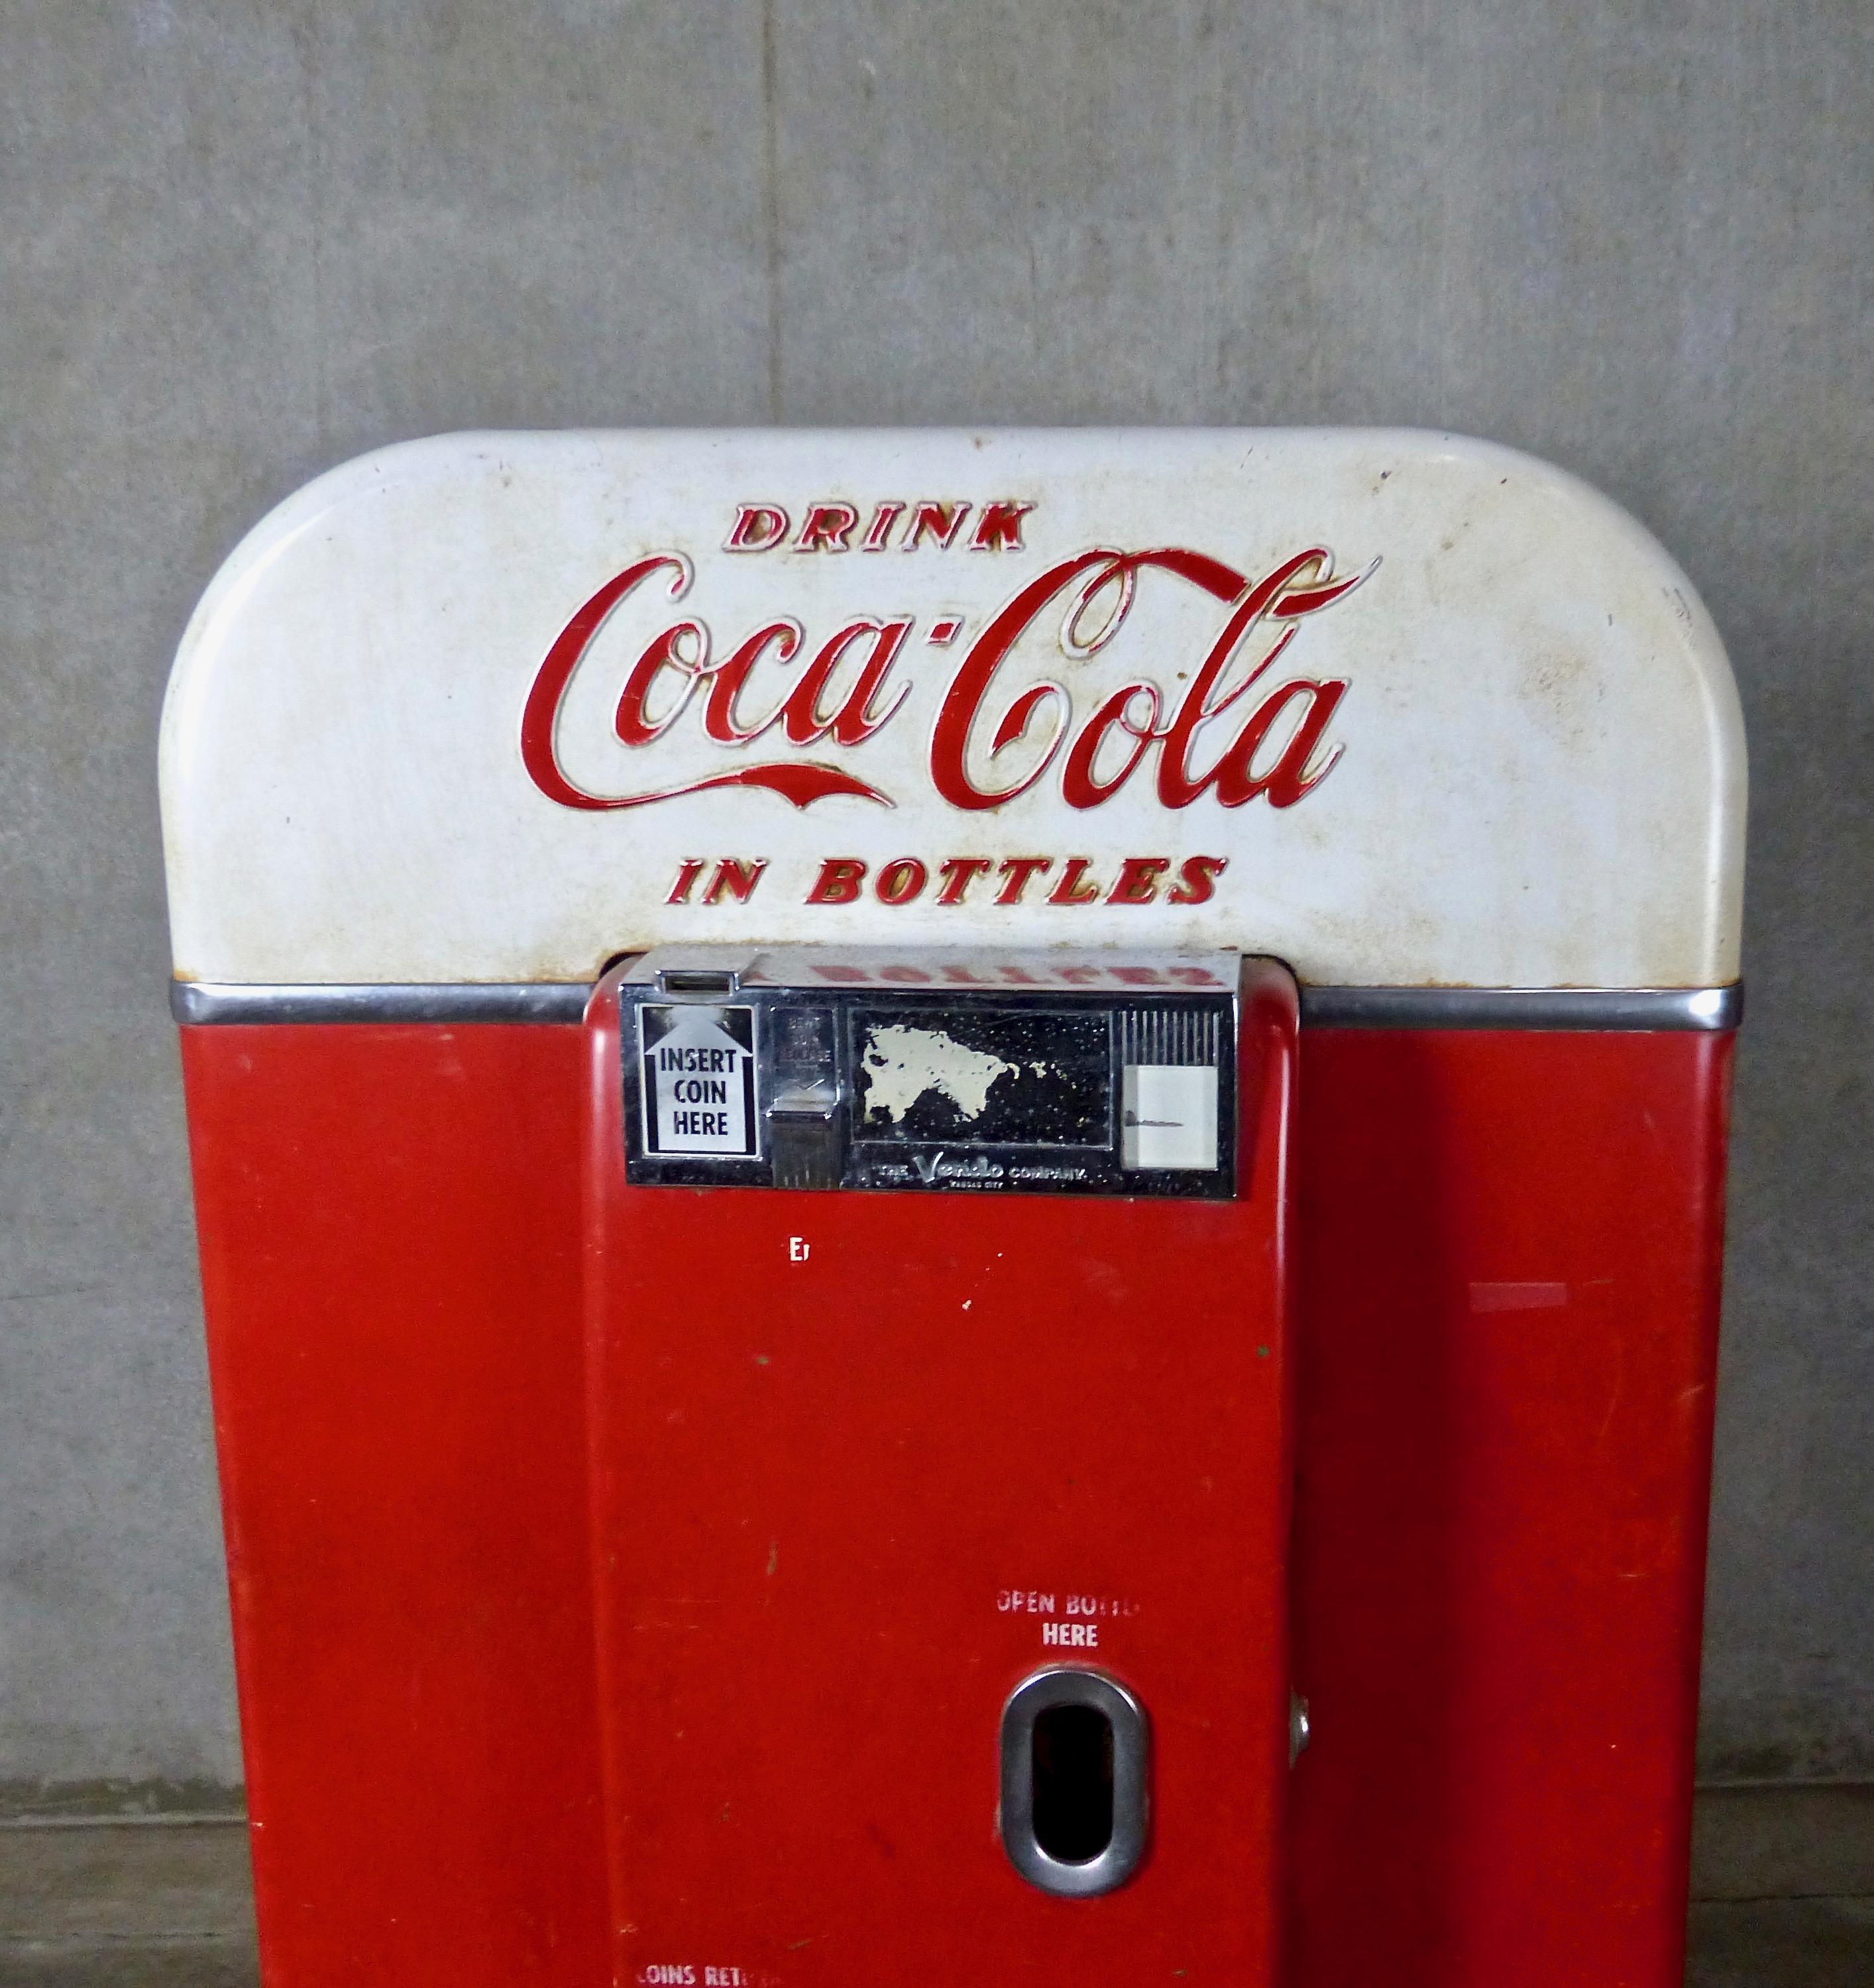 A rare, two-tone (red-and-white) coin-operated Coca Cola vending machine by the Vendo Company, Kansas City, Missouri. The refrigerated unit (M 80 E) features rounded corners and an intact interior (to cool, store, and vend multiple bottles of